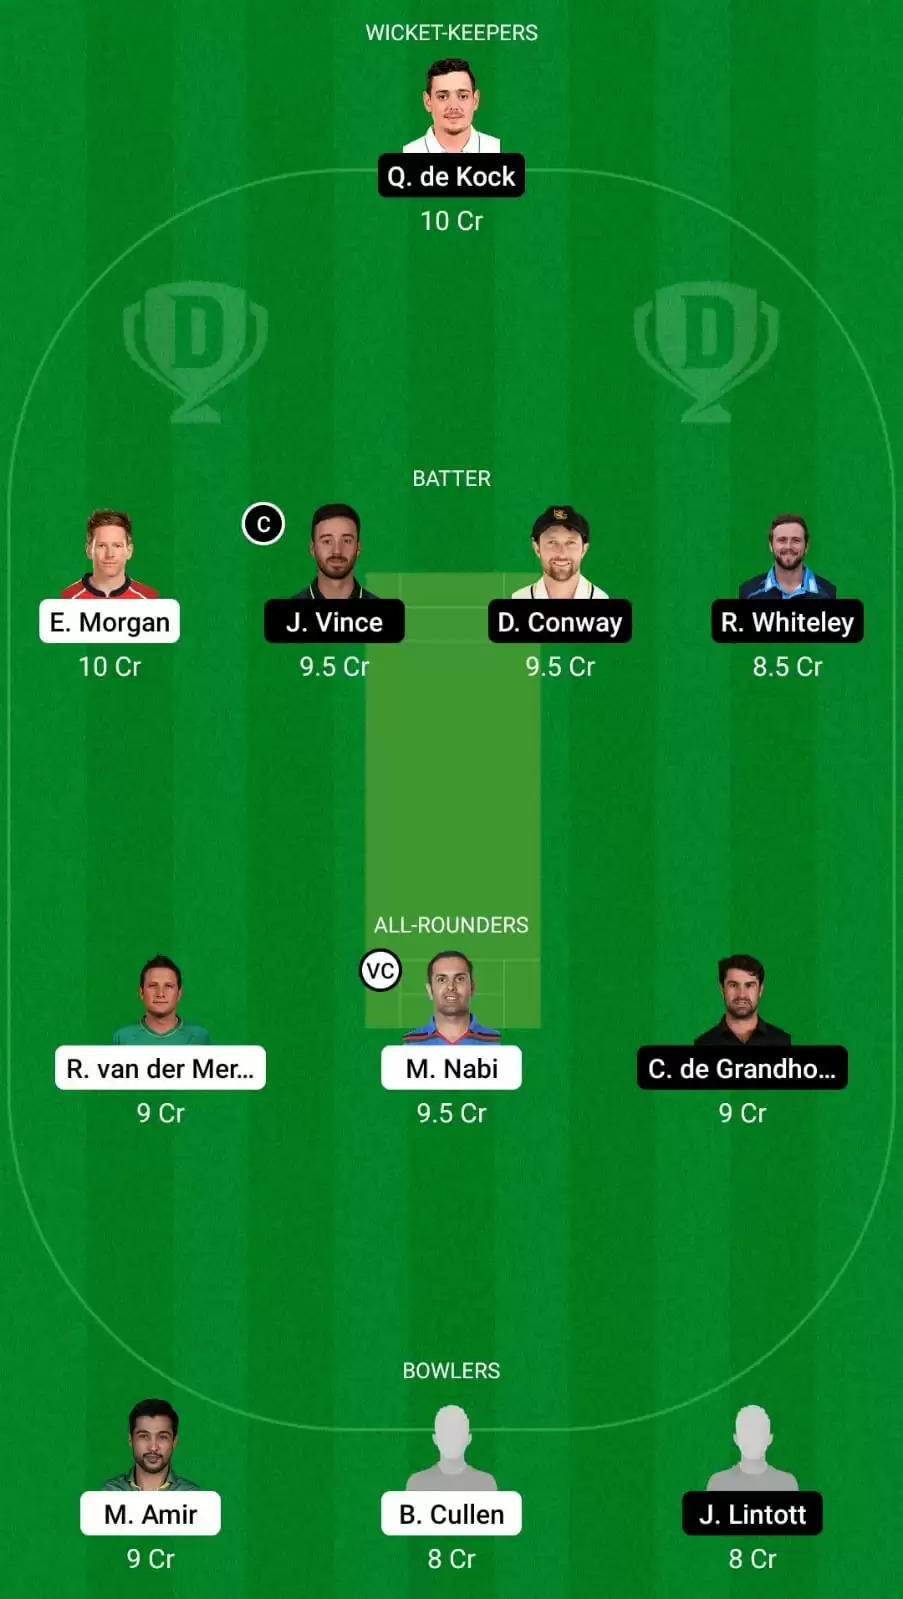 LNS vs SOB Dream11 Team Prediction for The Hundred Men’s 2021: London Spirit vs Southern Brave Best Fantasy Cricket Tips, Strongest Playing XI, Pitch Report and Player Updates